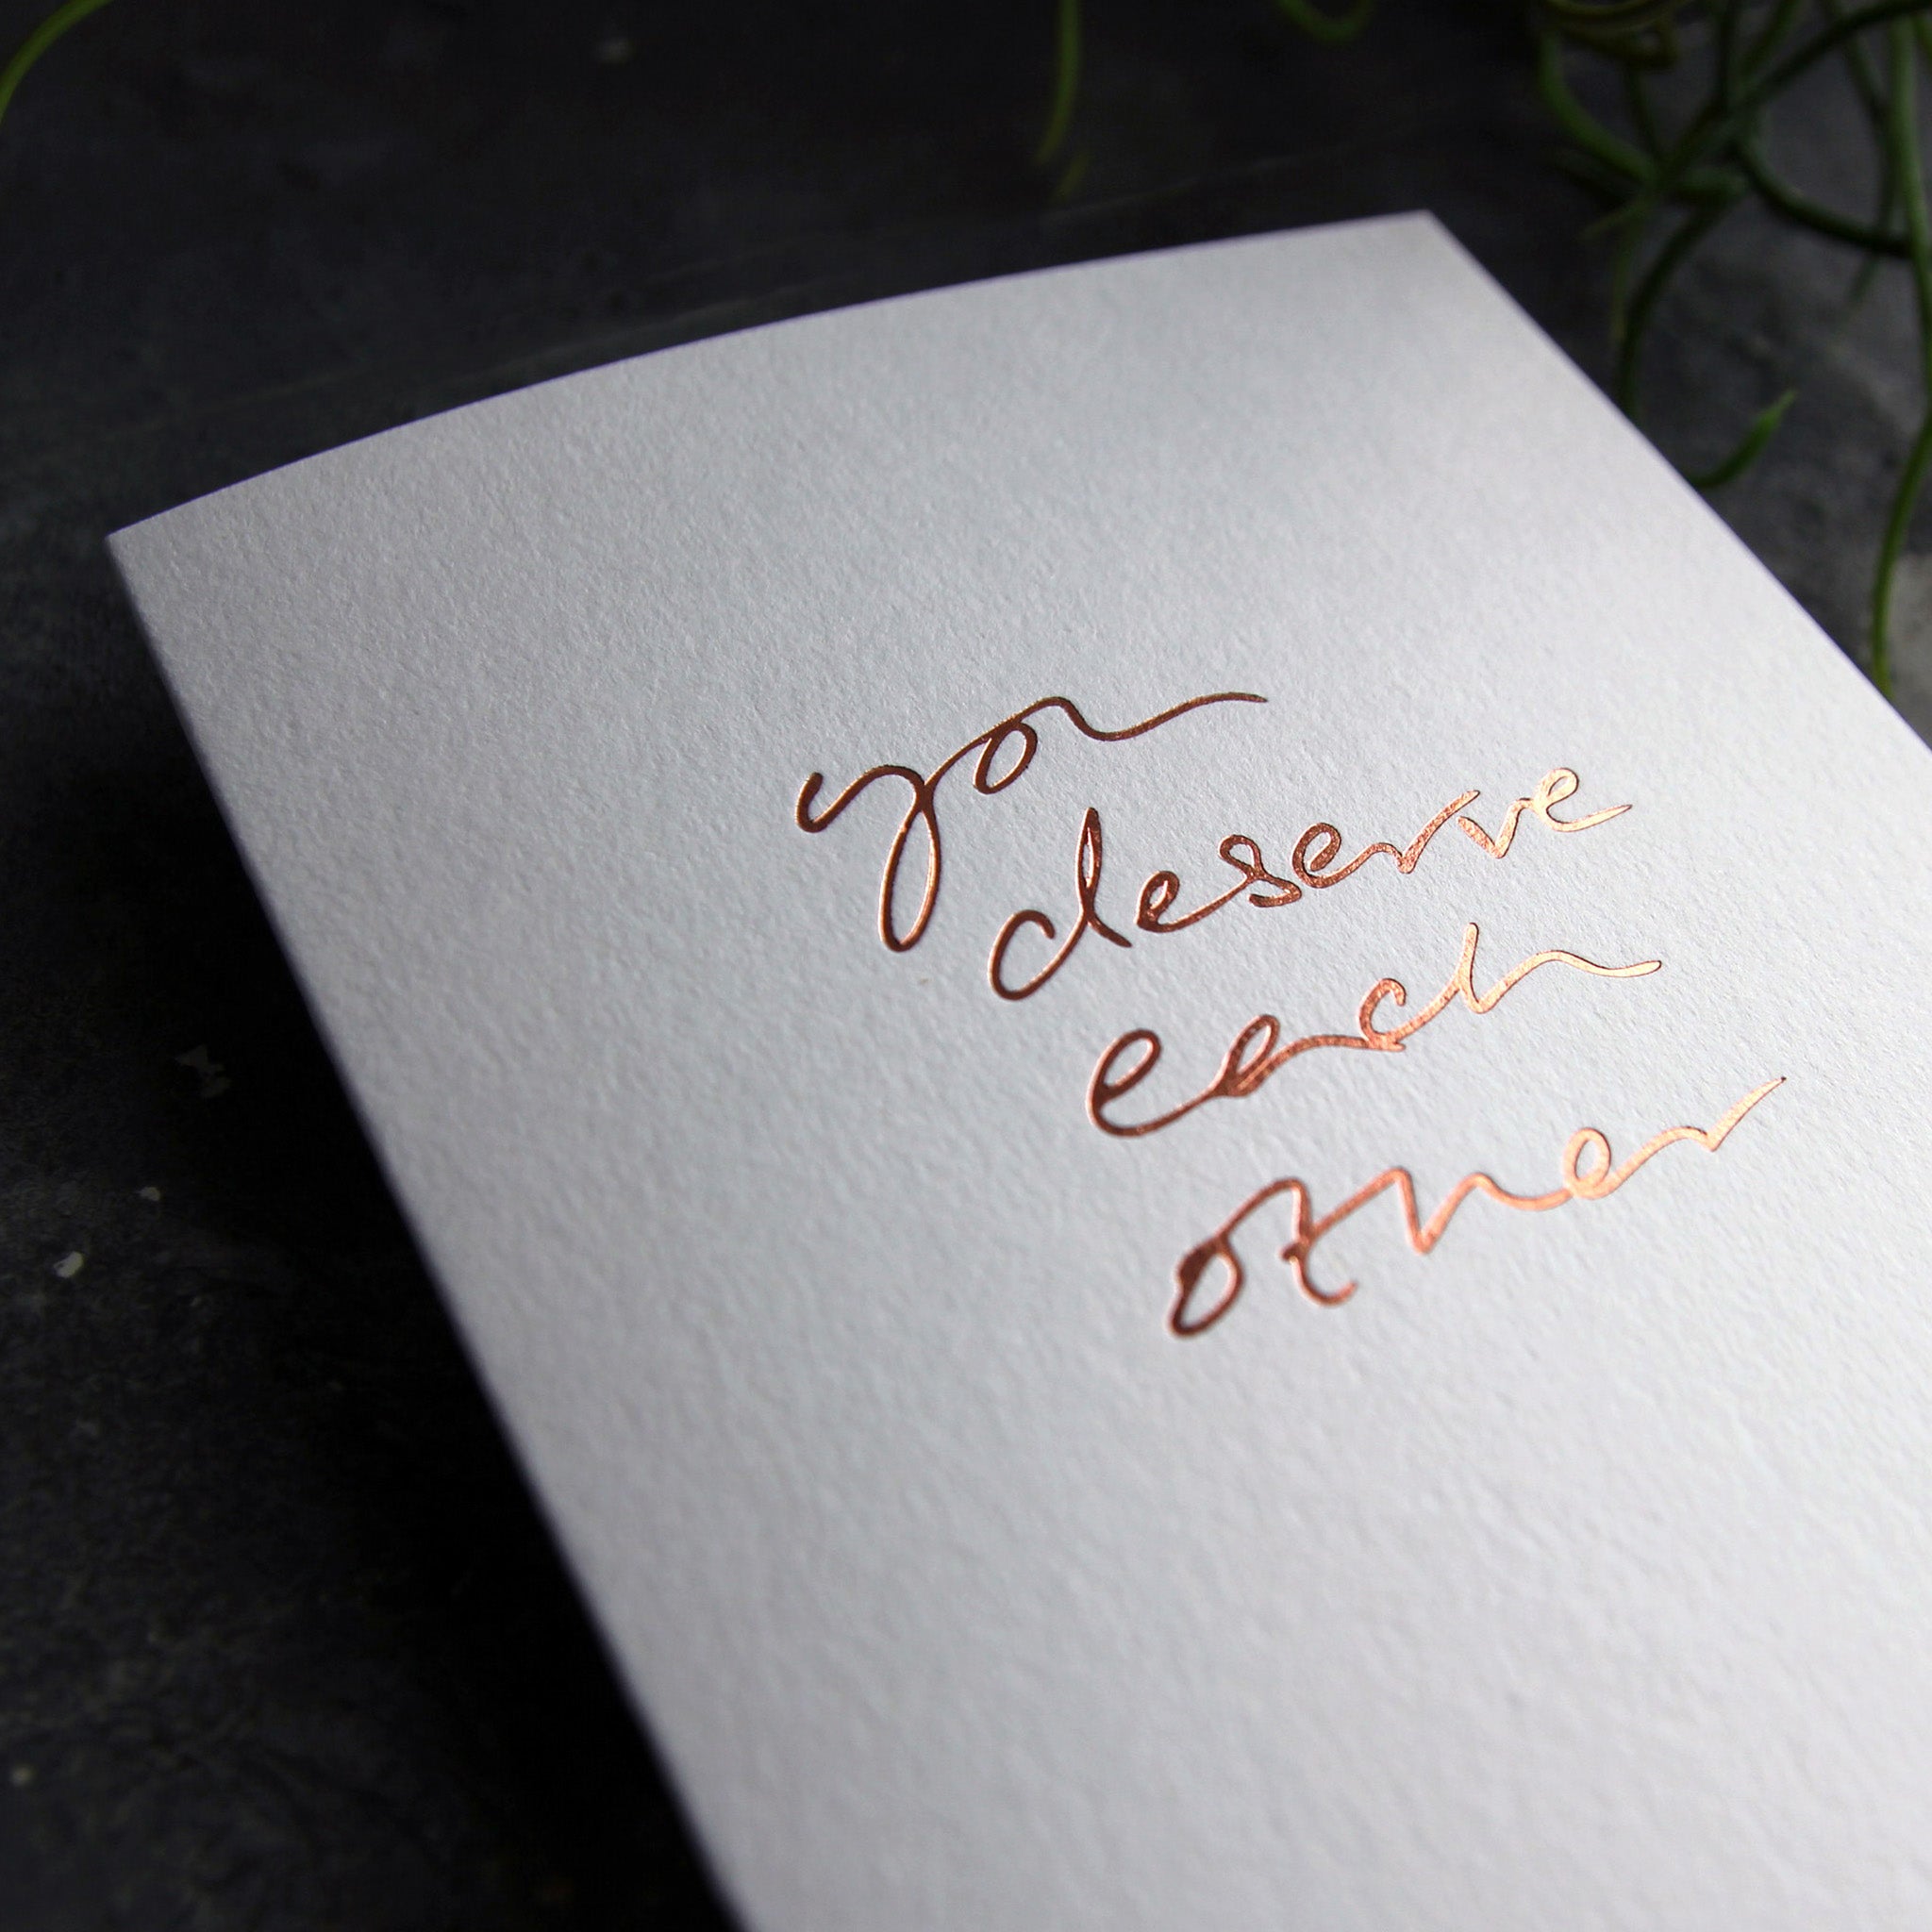 Close up of luxury white greetings card with "You Deserve Each Other' handwritten in the front and hand printed in rose gold foil on a grey background with some green plant leaves at the side.